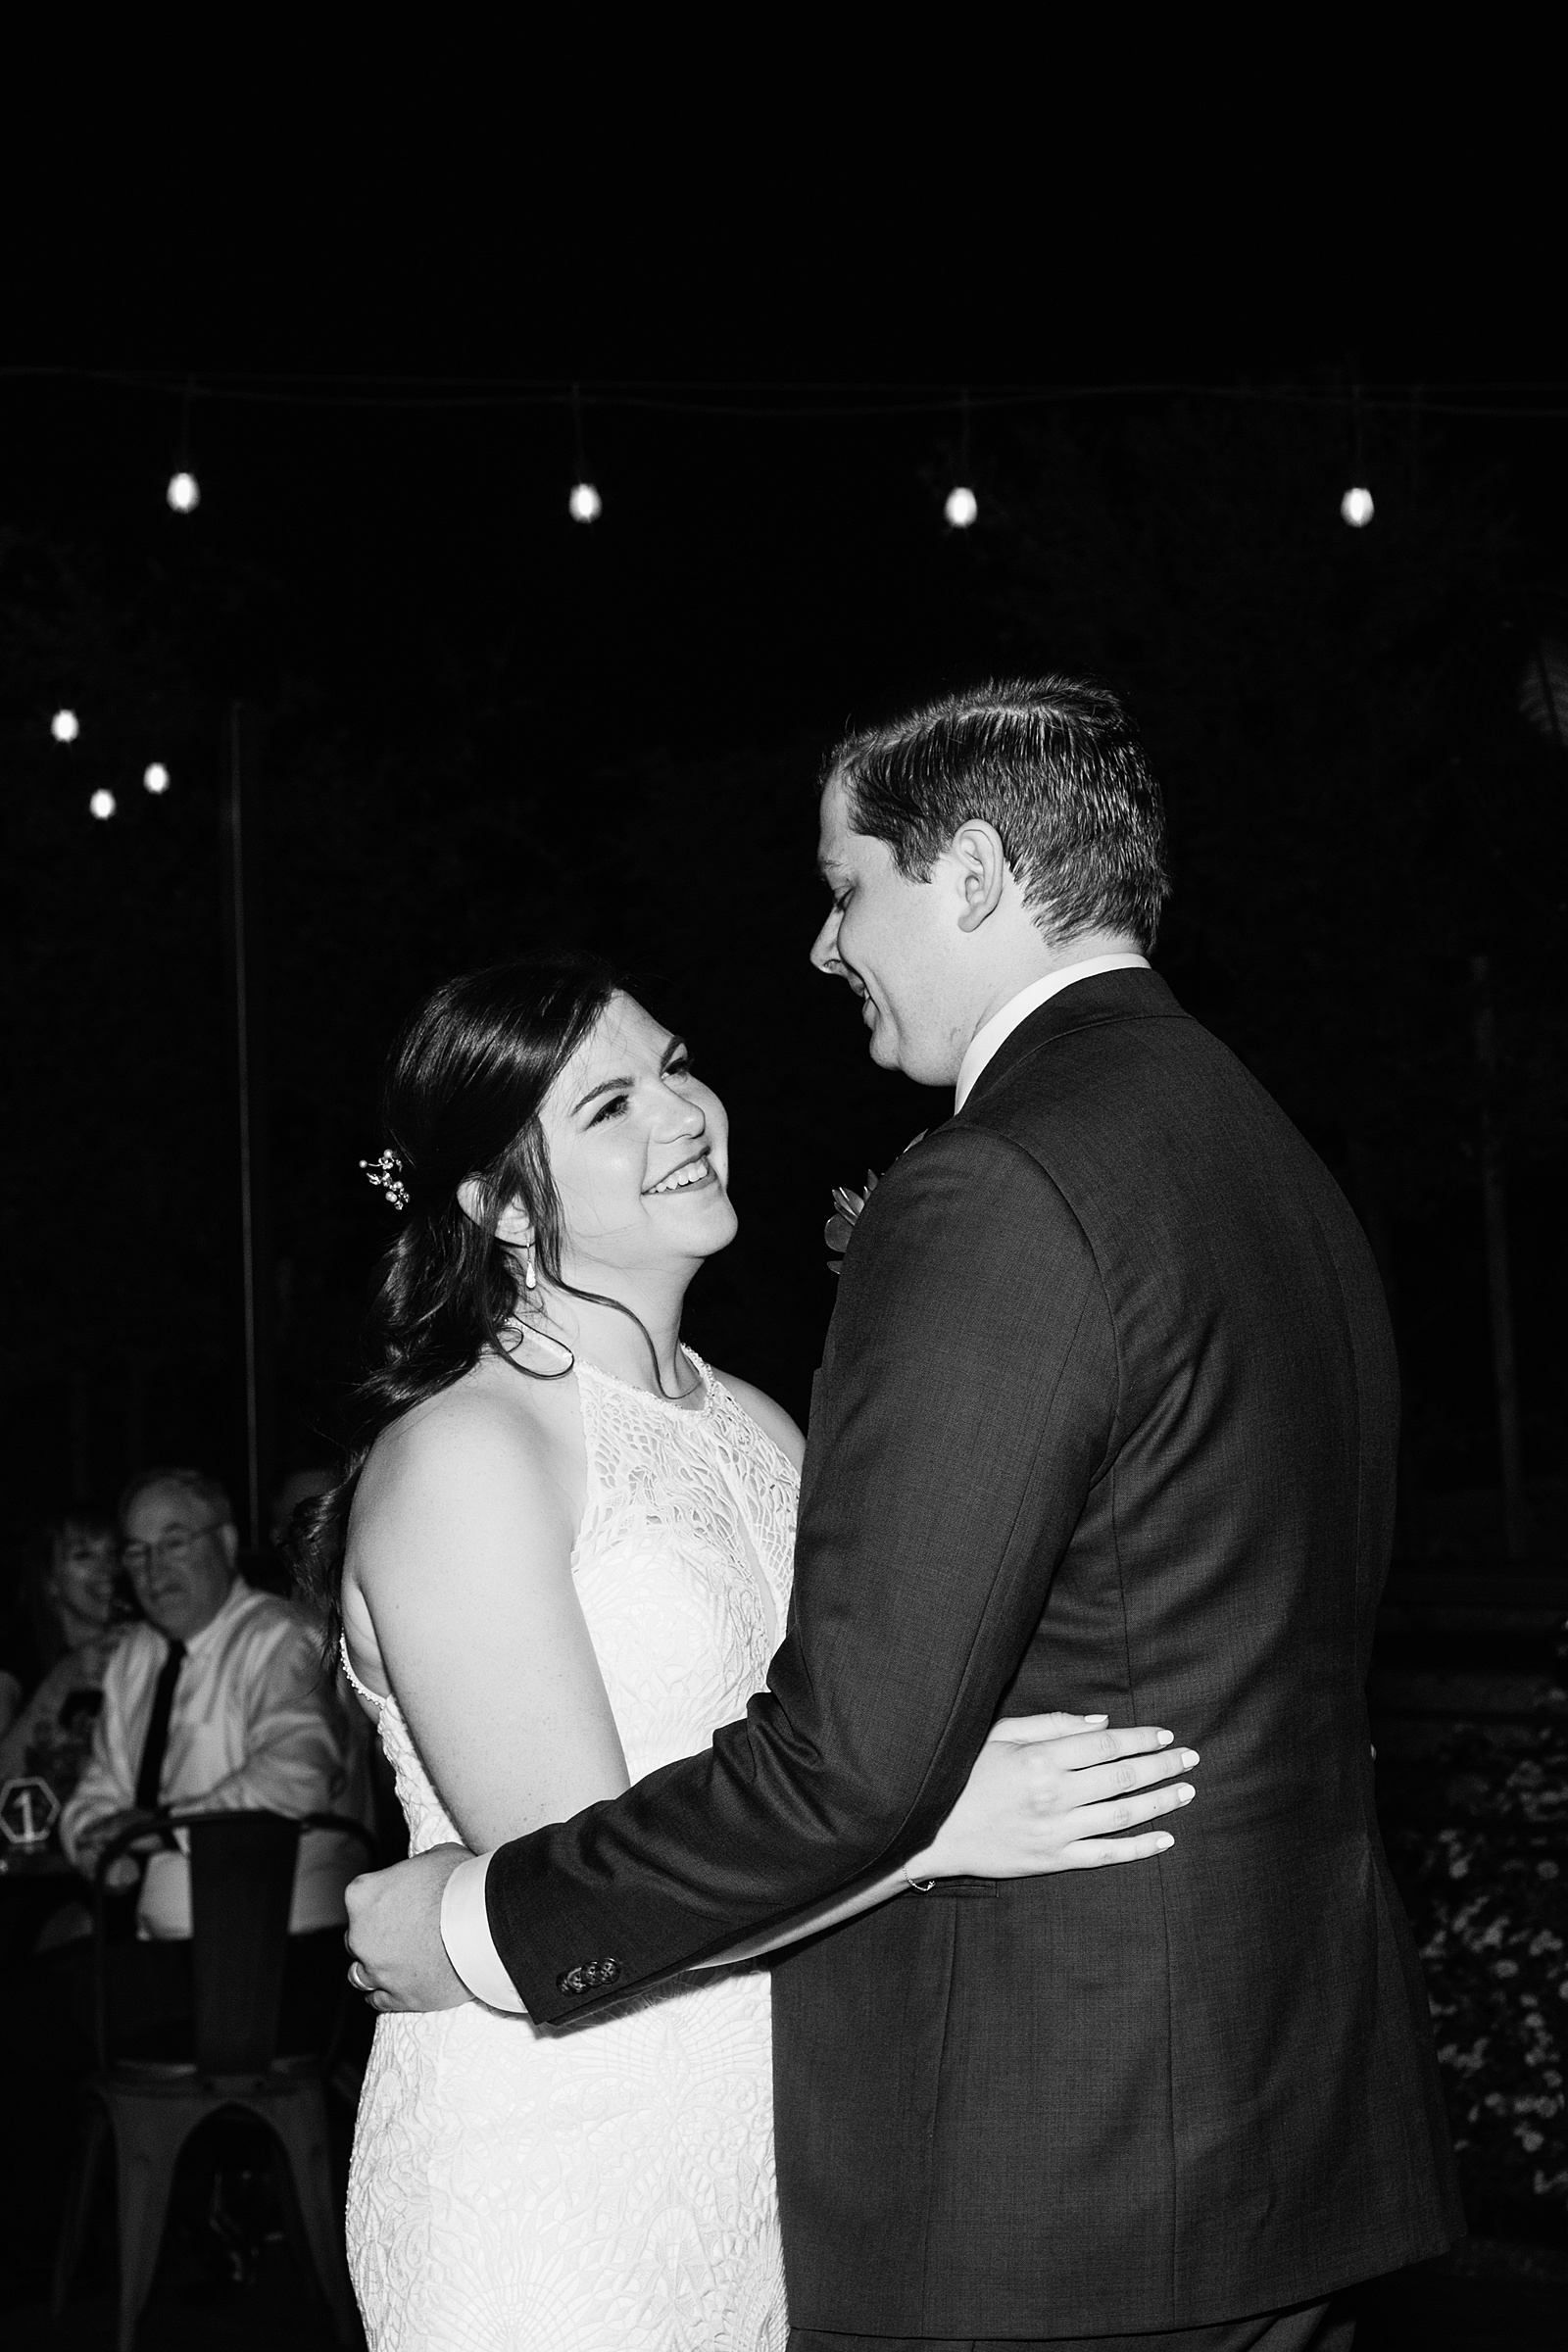 Bride & Groom sharing first dance at their San Tan Gardens wedding reception by Arizona wedding photographer Juniper and Co Photography.